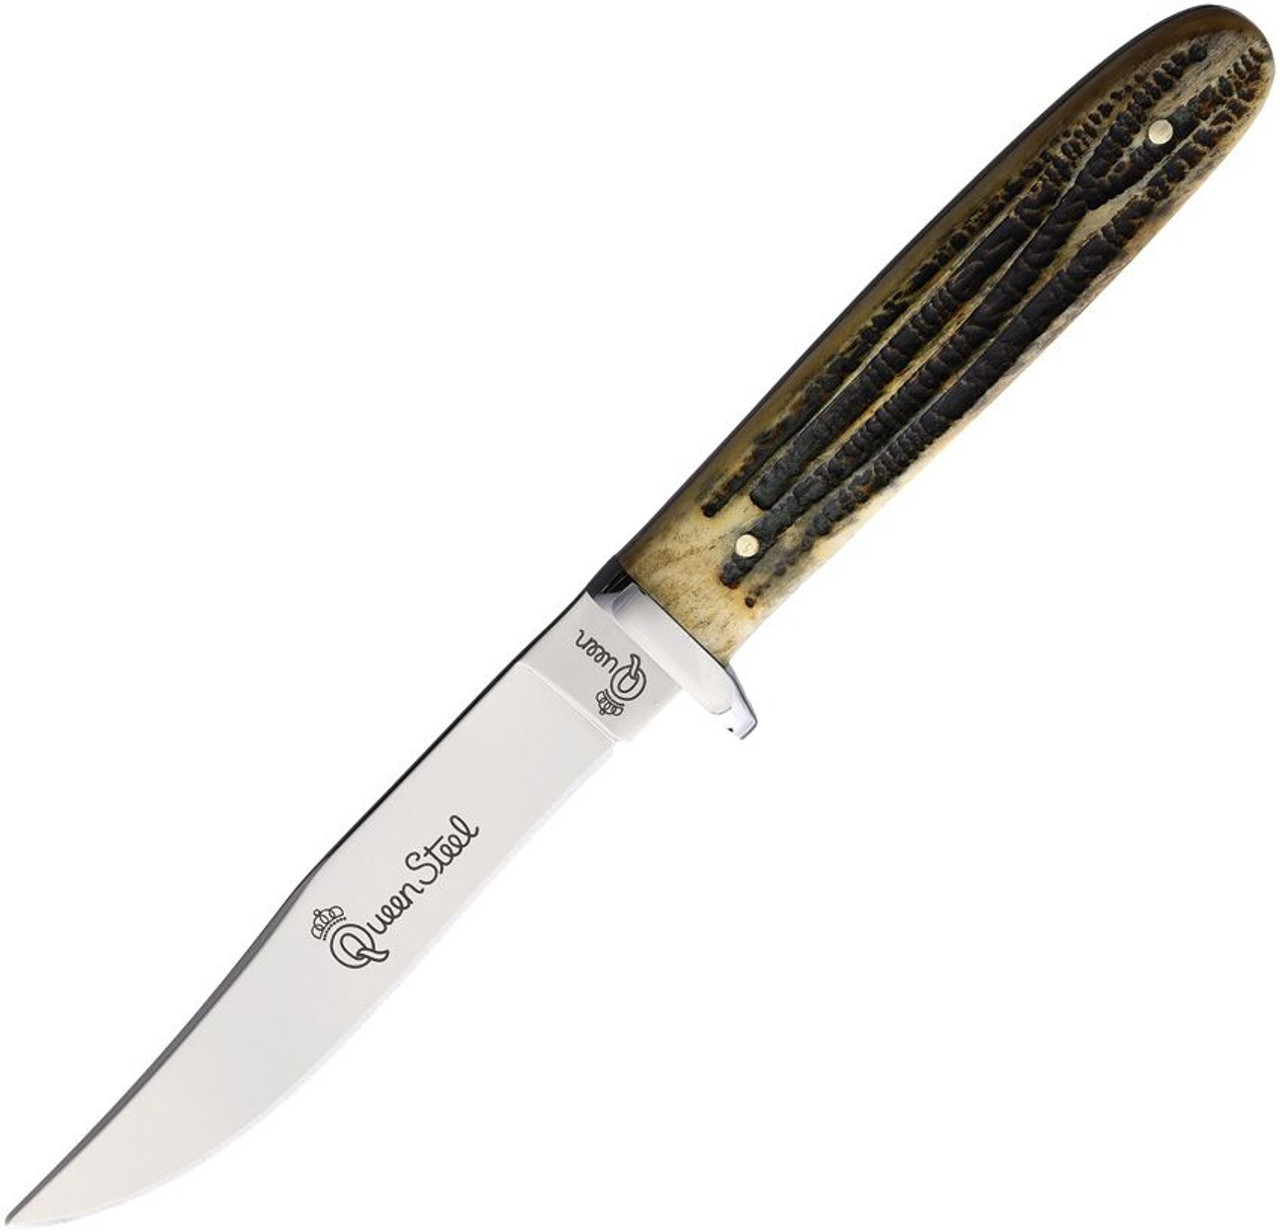 Queen Cutlery Canoe Fixed blade (QN89WB) - 3.75" Mirror-Polished 440C Stainless Steel Fixed Clip Point Blade, Winterbottom Jigged Bone Handle